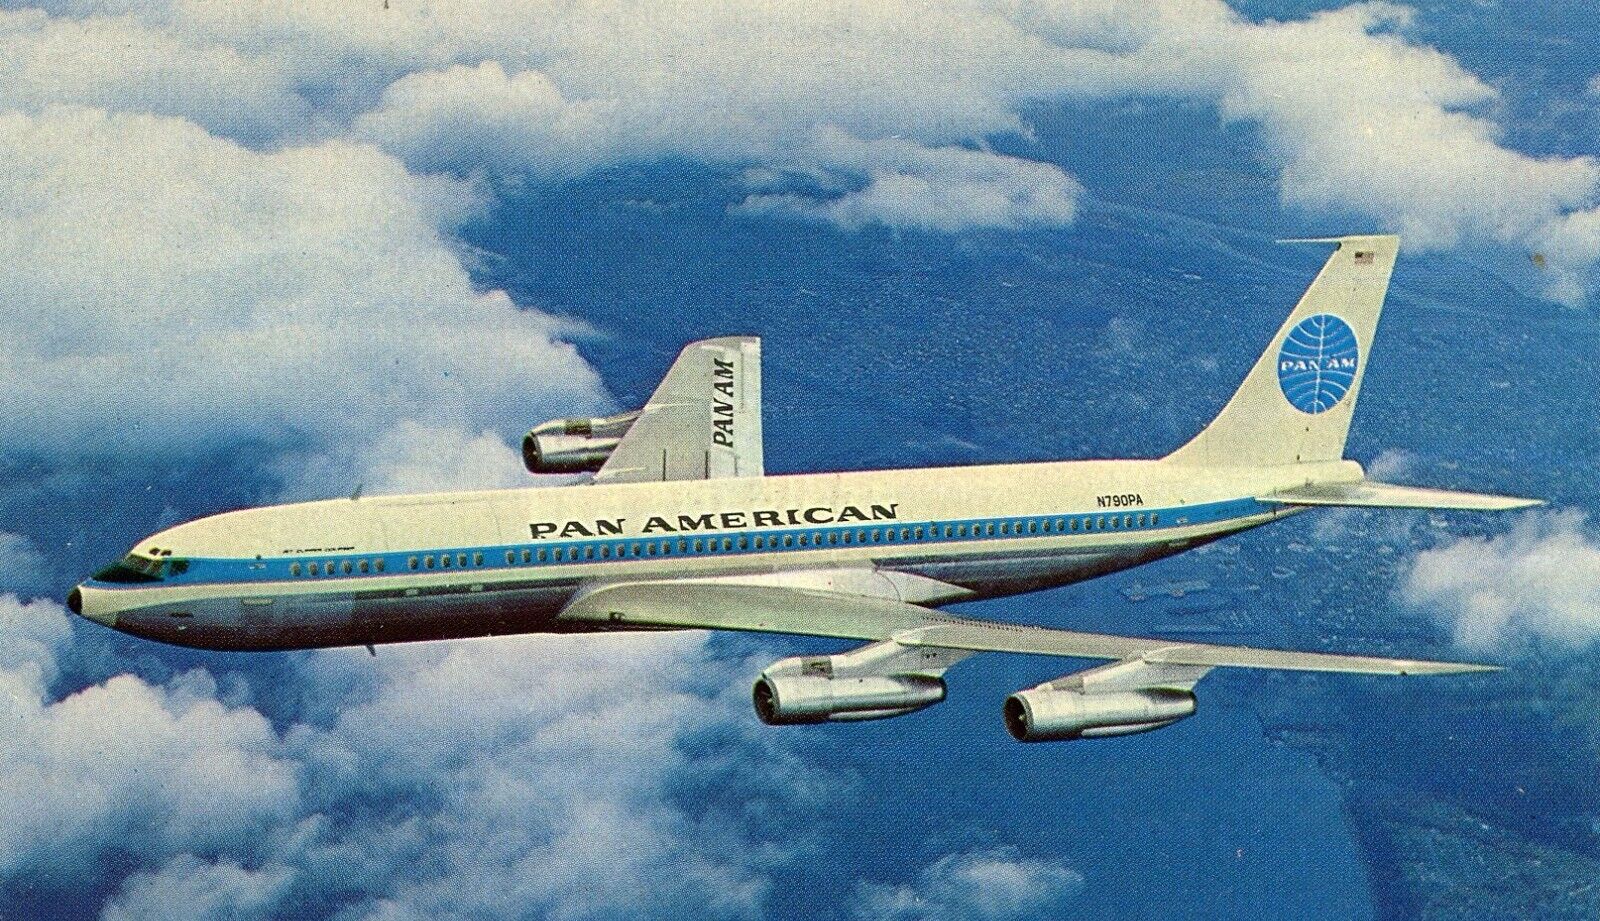 PAN AM / PAN AMERICAN  AIRLINES  B-707  AIRPORT / AIRCRAFT / AIRLINE ISSUE # 1